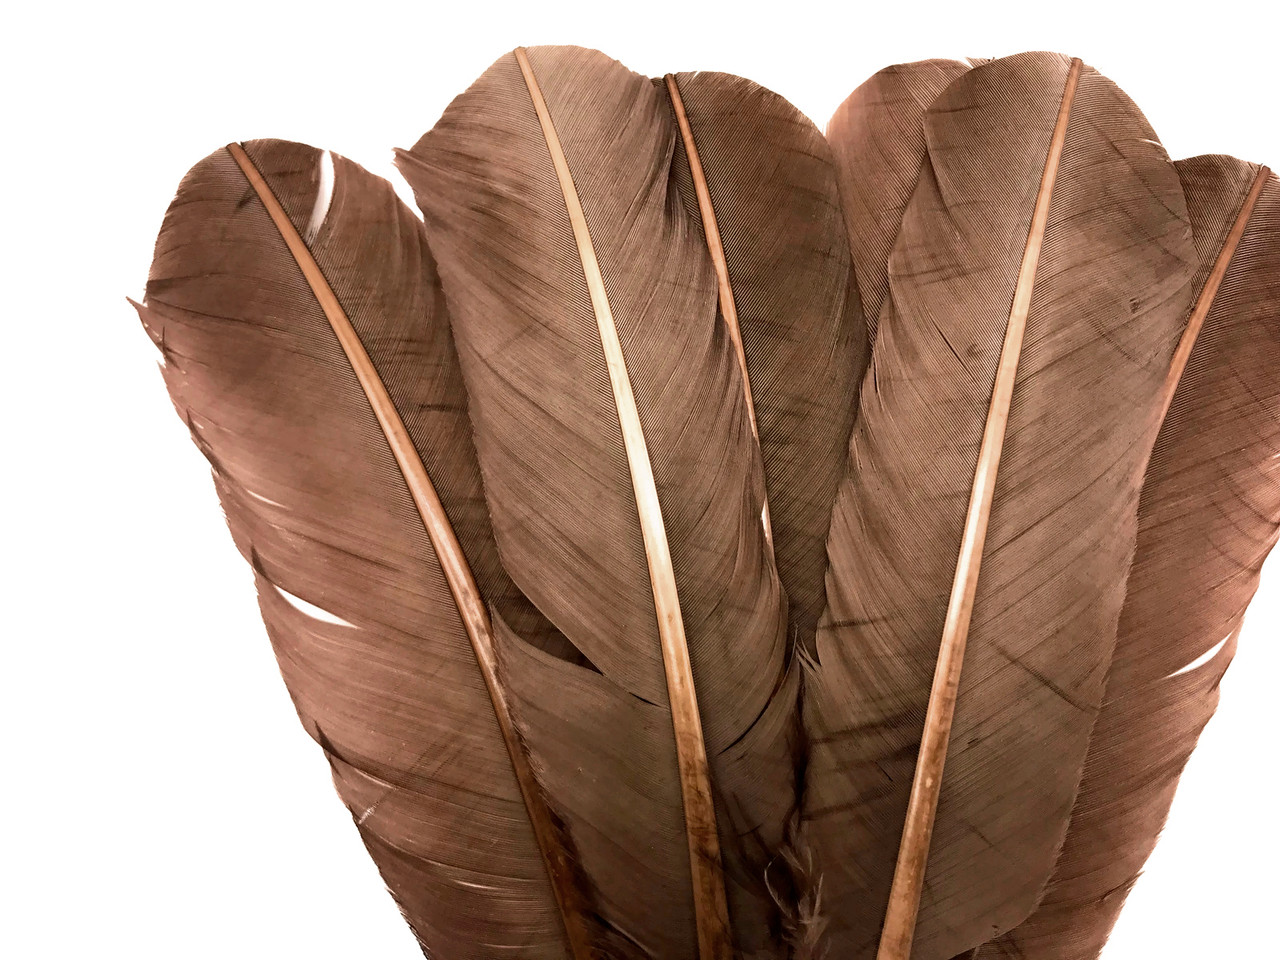 1/4 lb. - Light Brown Turkey Tom Rounds Secondary Wing Quill Wholesale Feathers (Bulk)